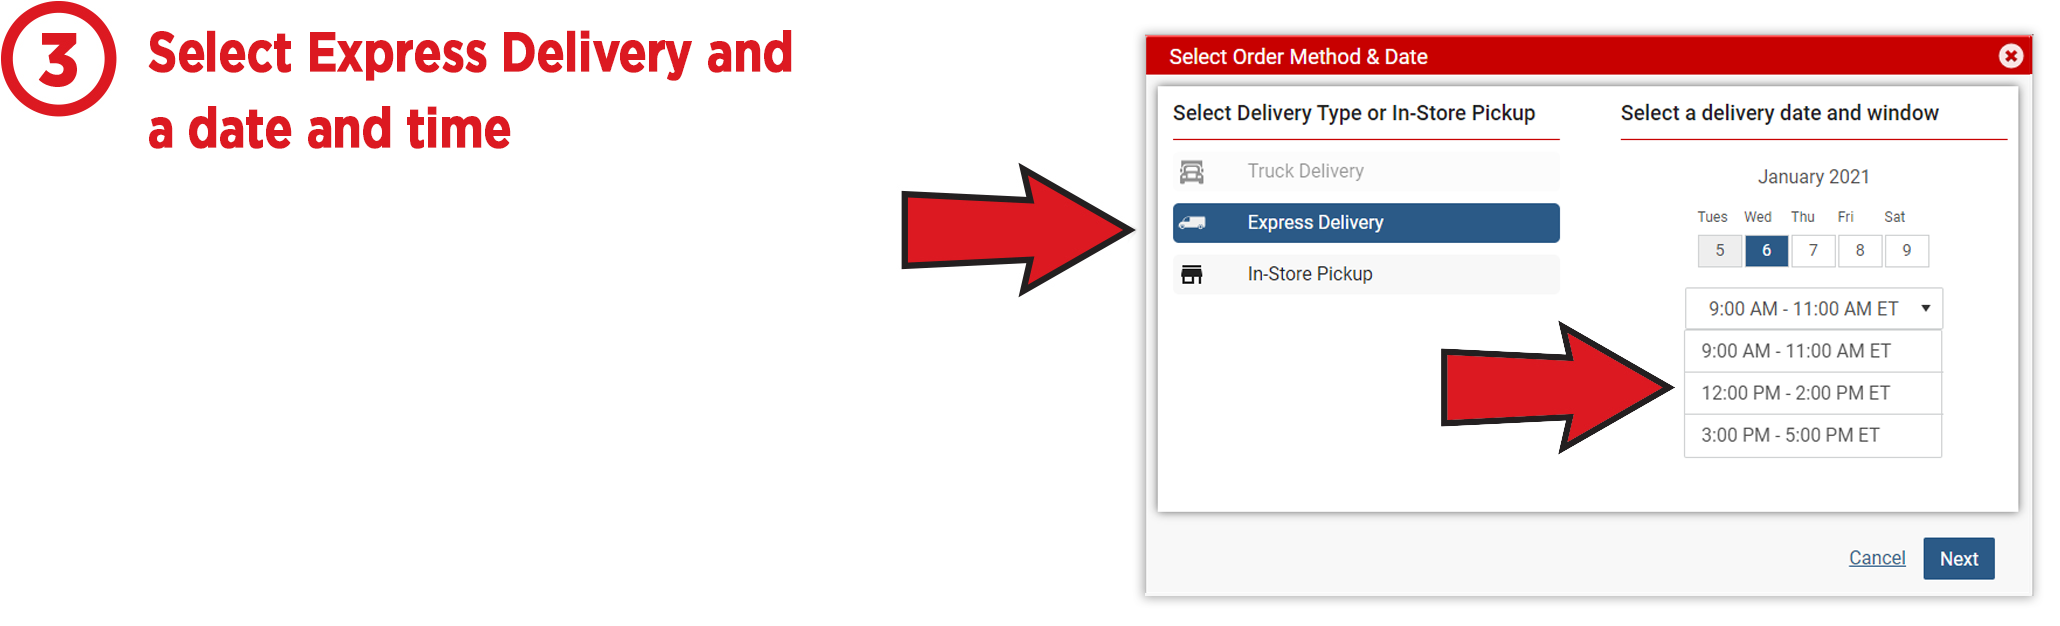 Select Express Delivery